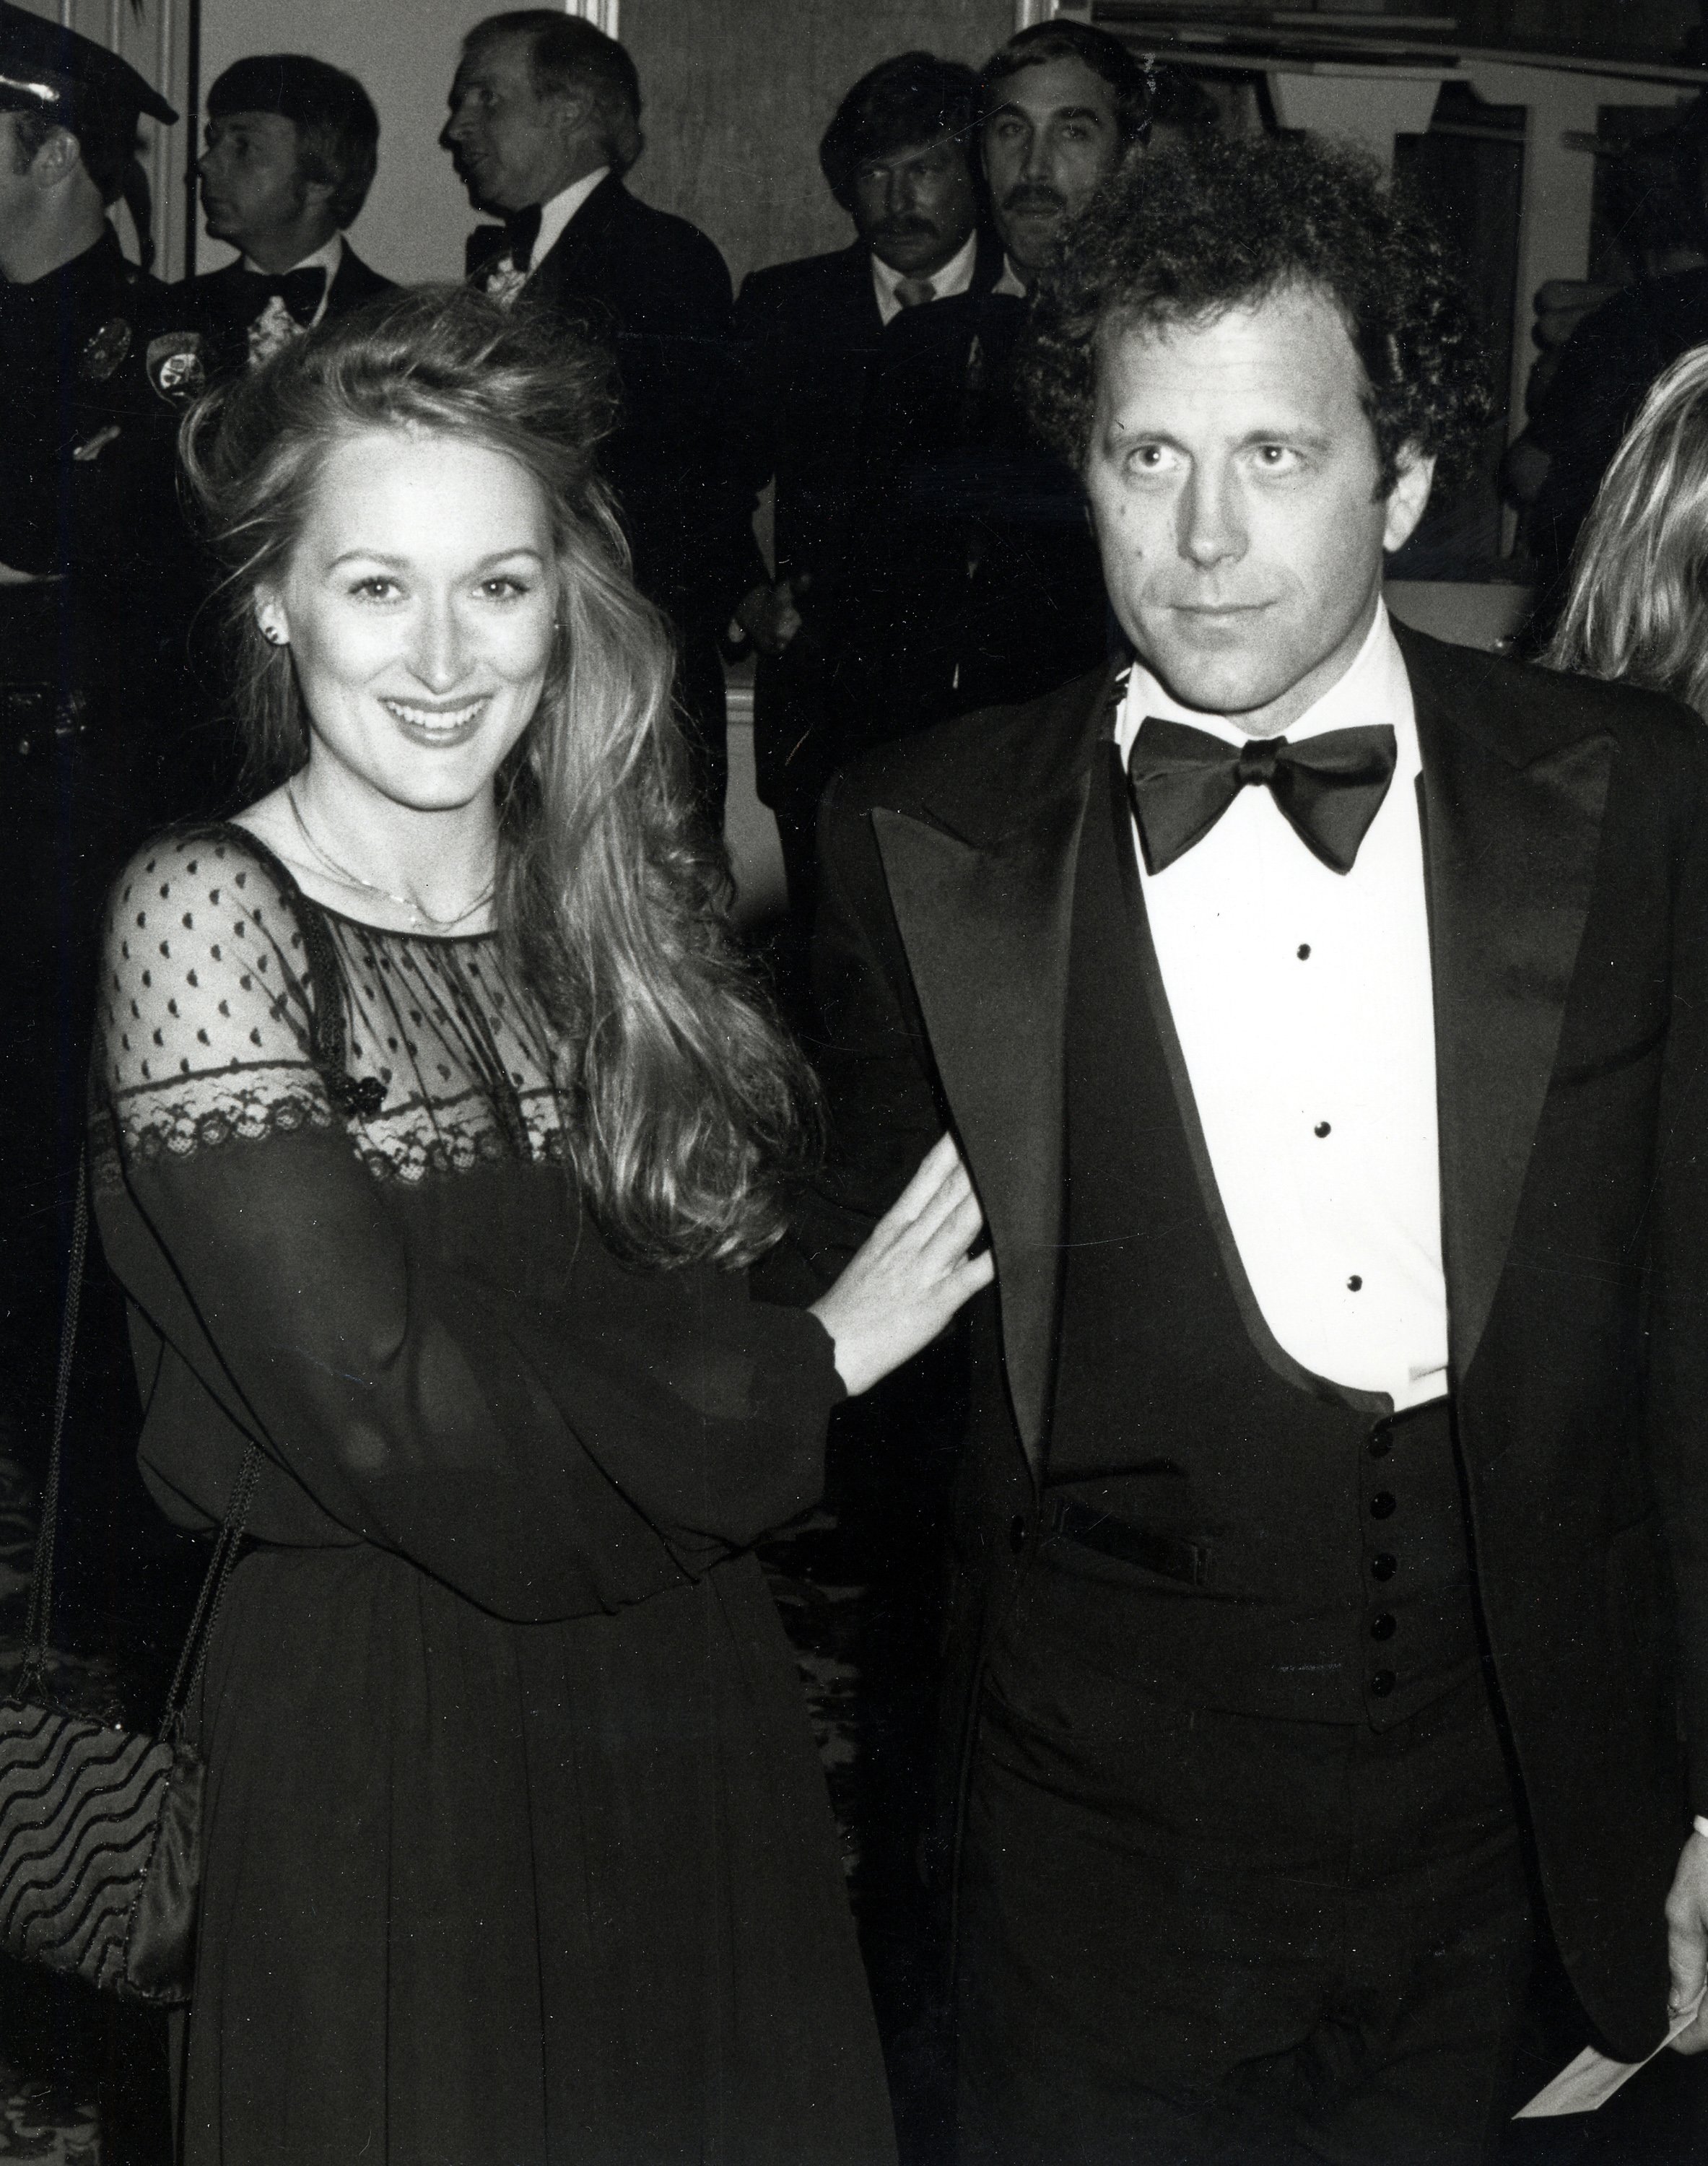 Meryl Streep and husband Don Gummer attend the Dorothy Chandler Pavilion in Los Angeles, California on April 9, 1979 | Photo: Getty Images